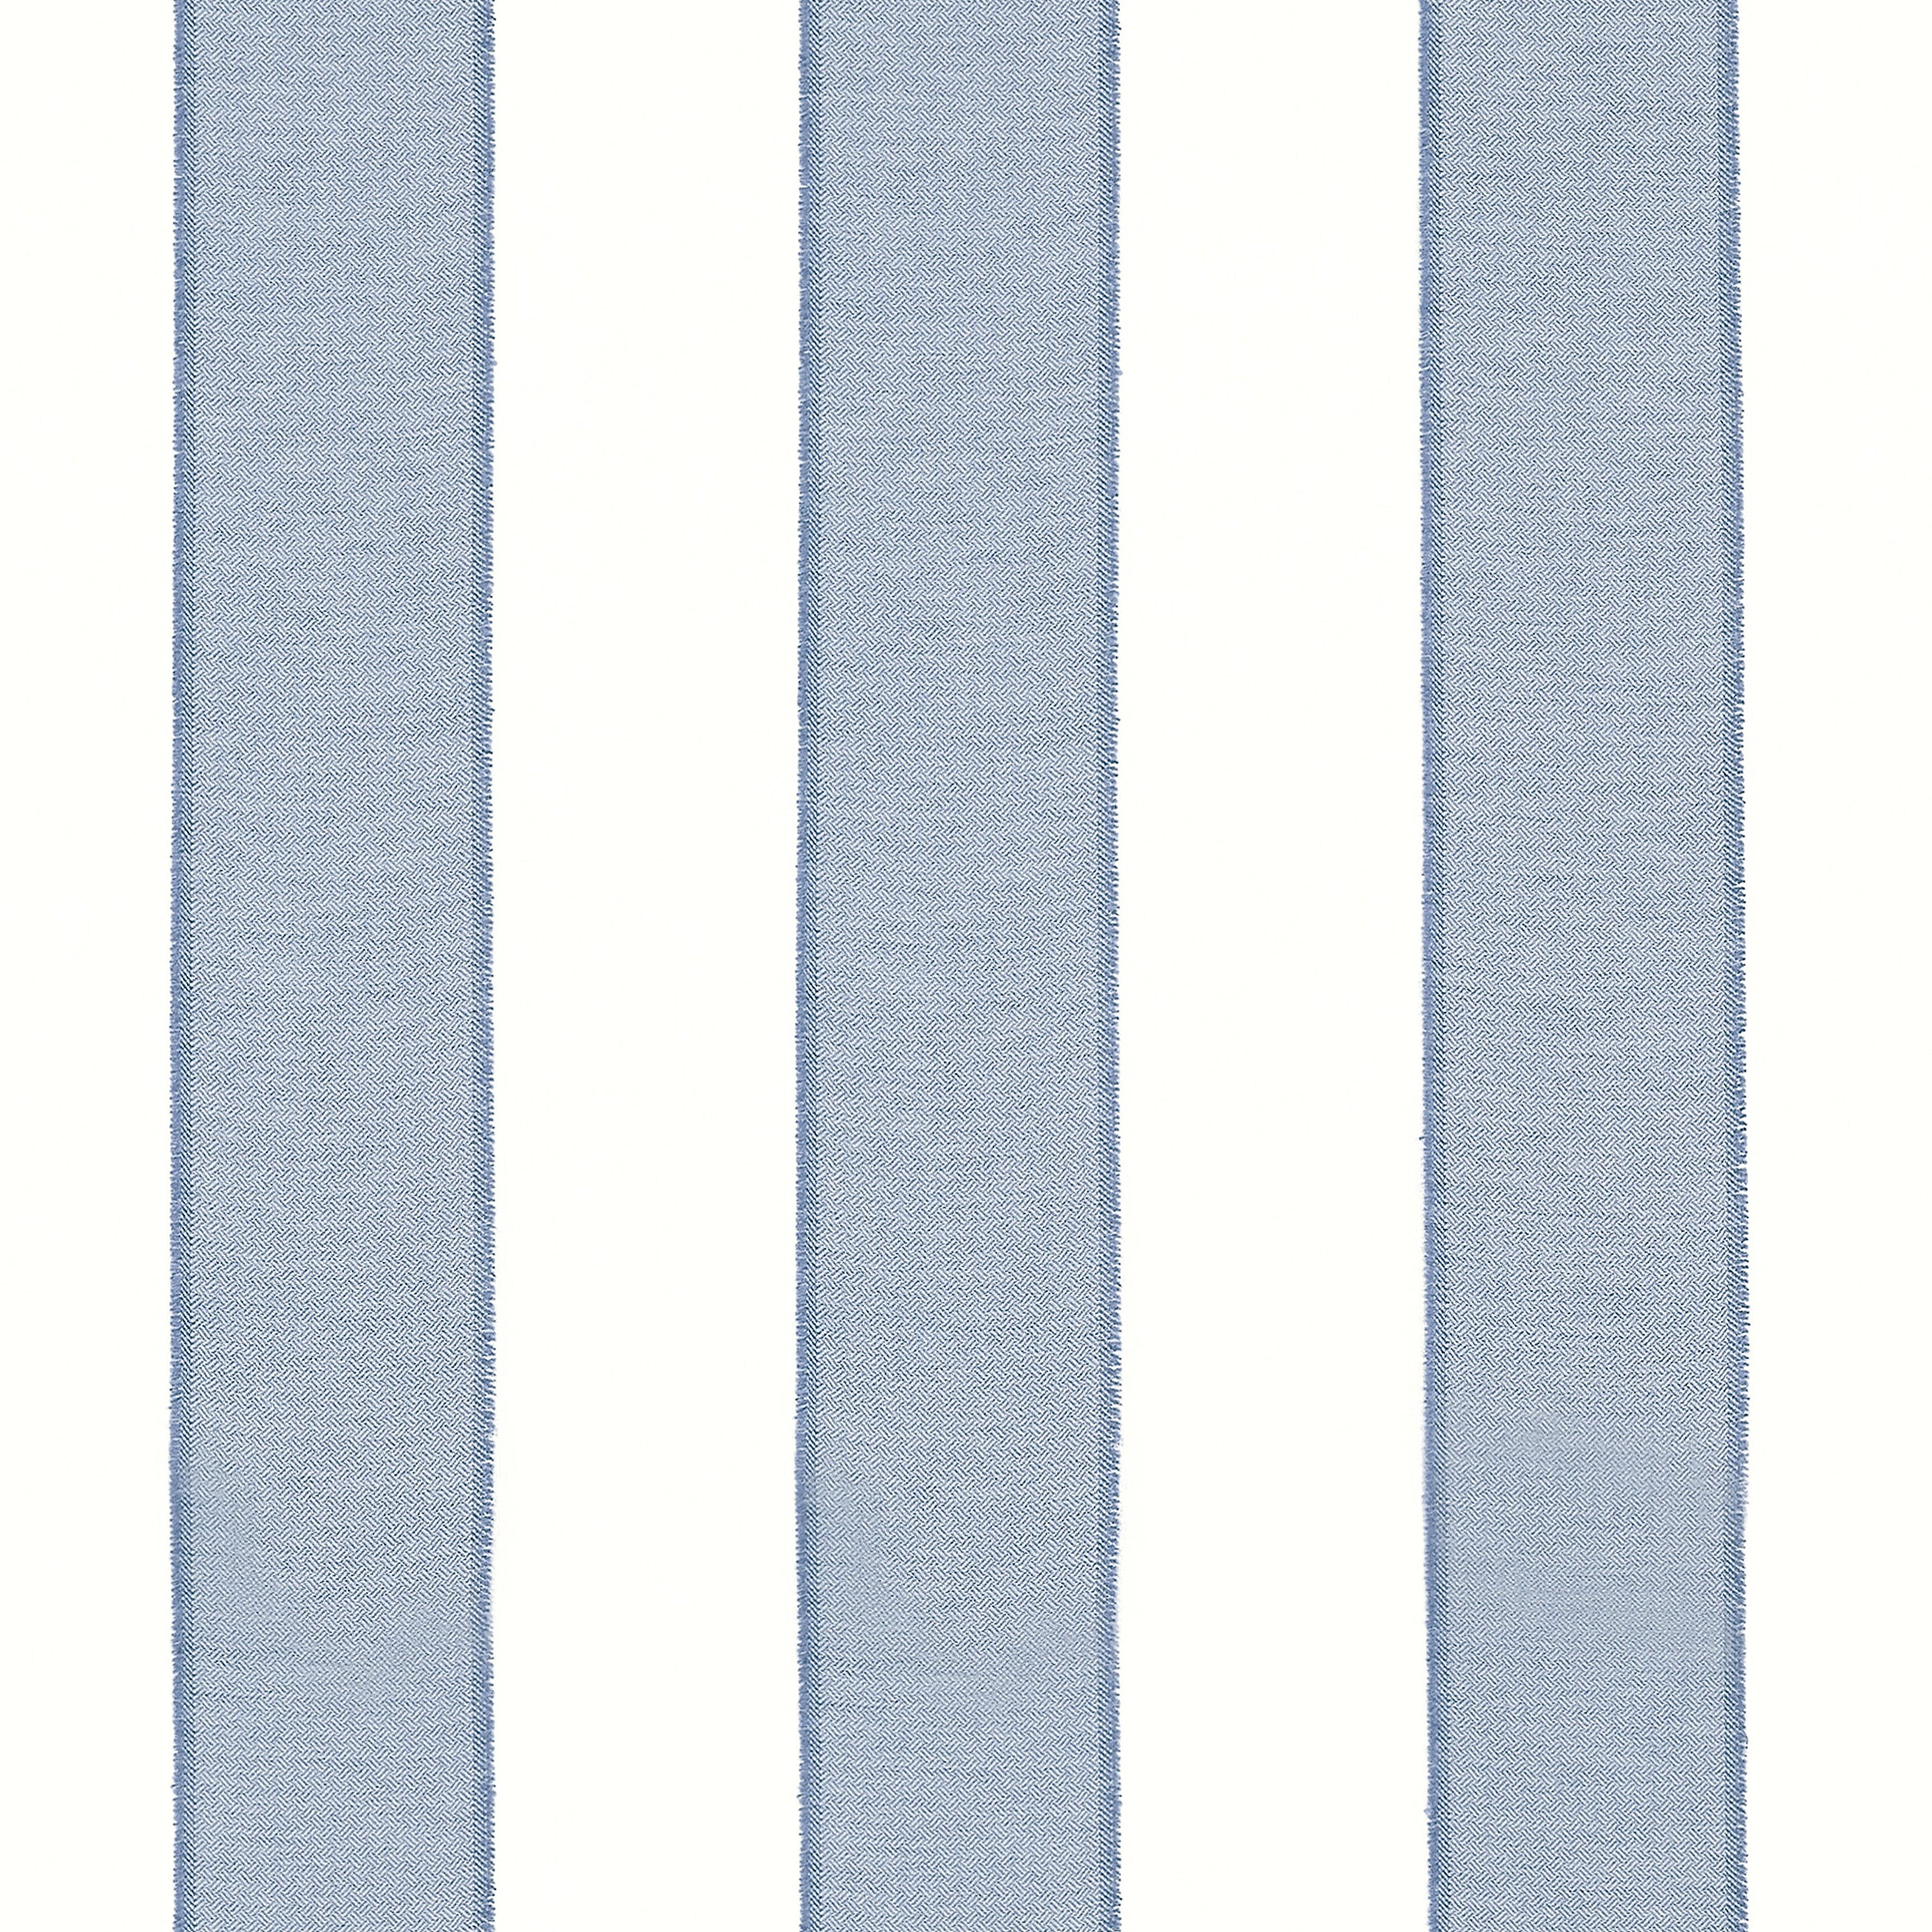 Intaglio Stripe fabric in oxford blue color - pattern number FWW81745 - by Thibaut in the Locale Wide Width collection